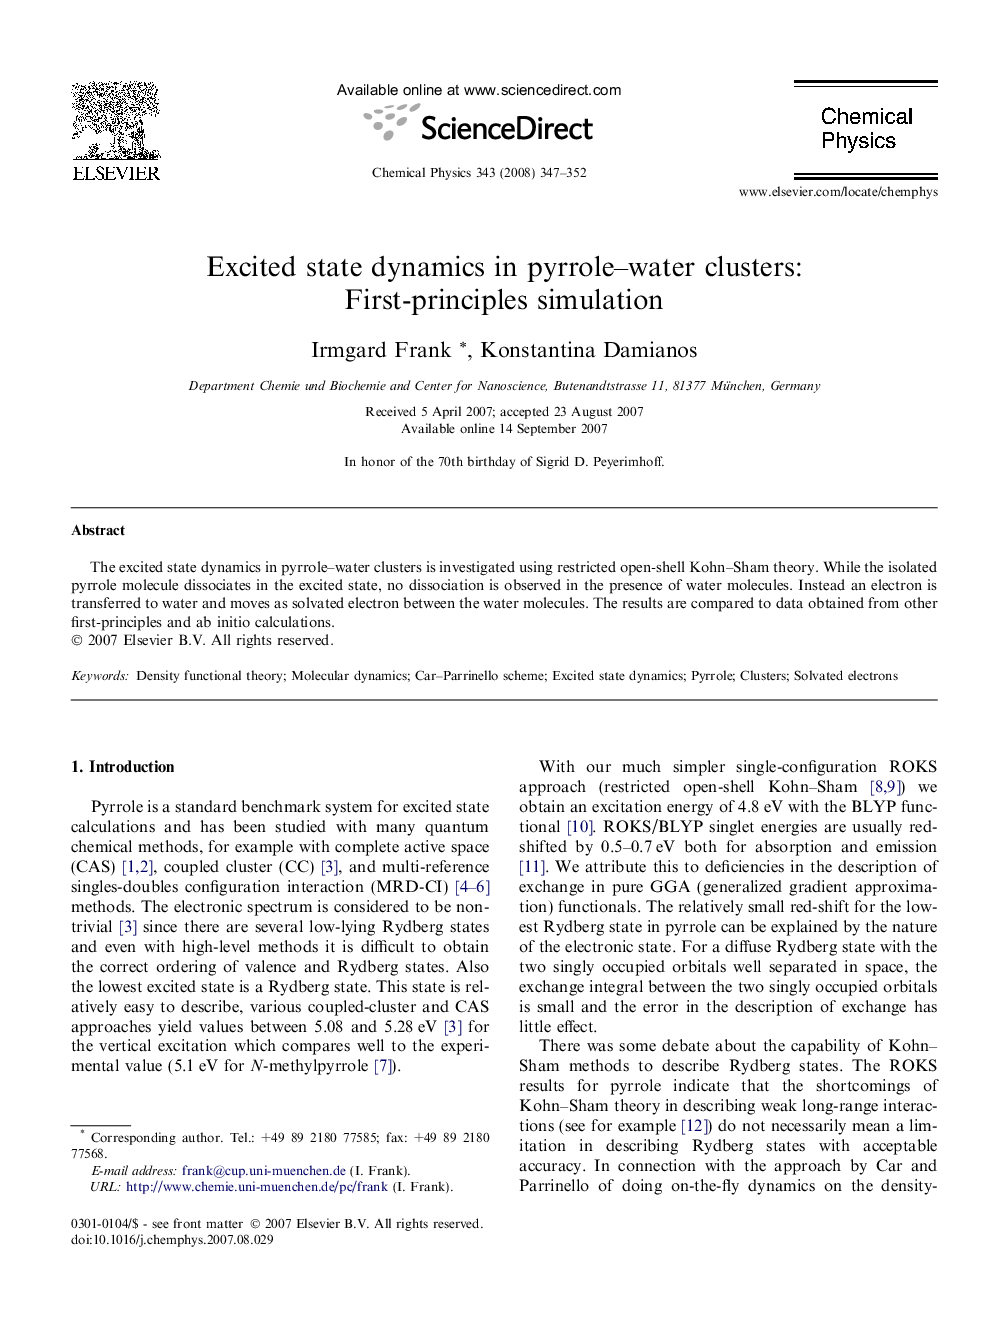 Excited state dynamics in pyrrole-water clusters: First-principles simulation